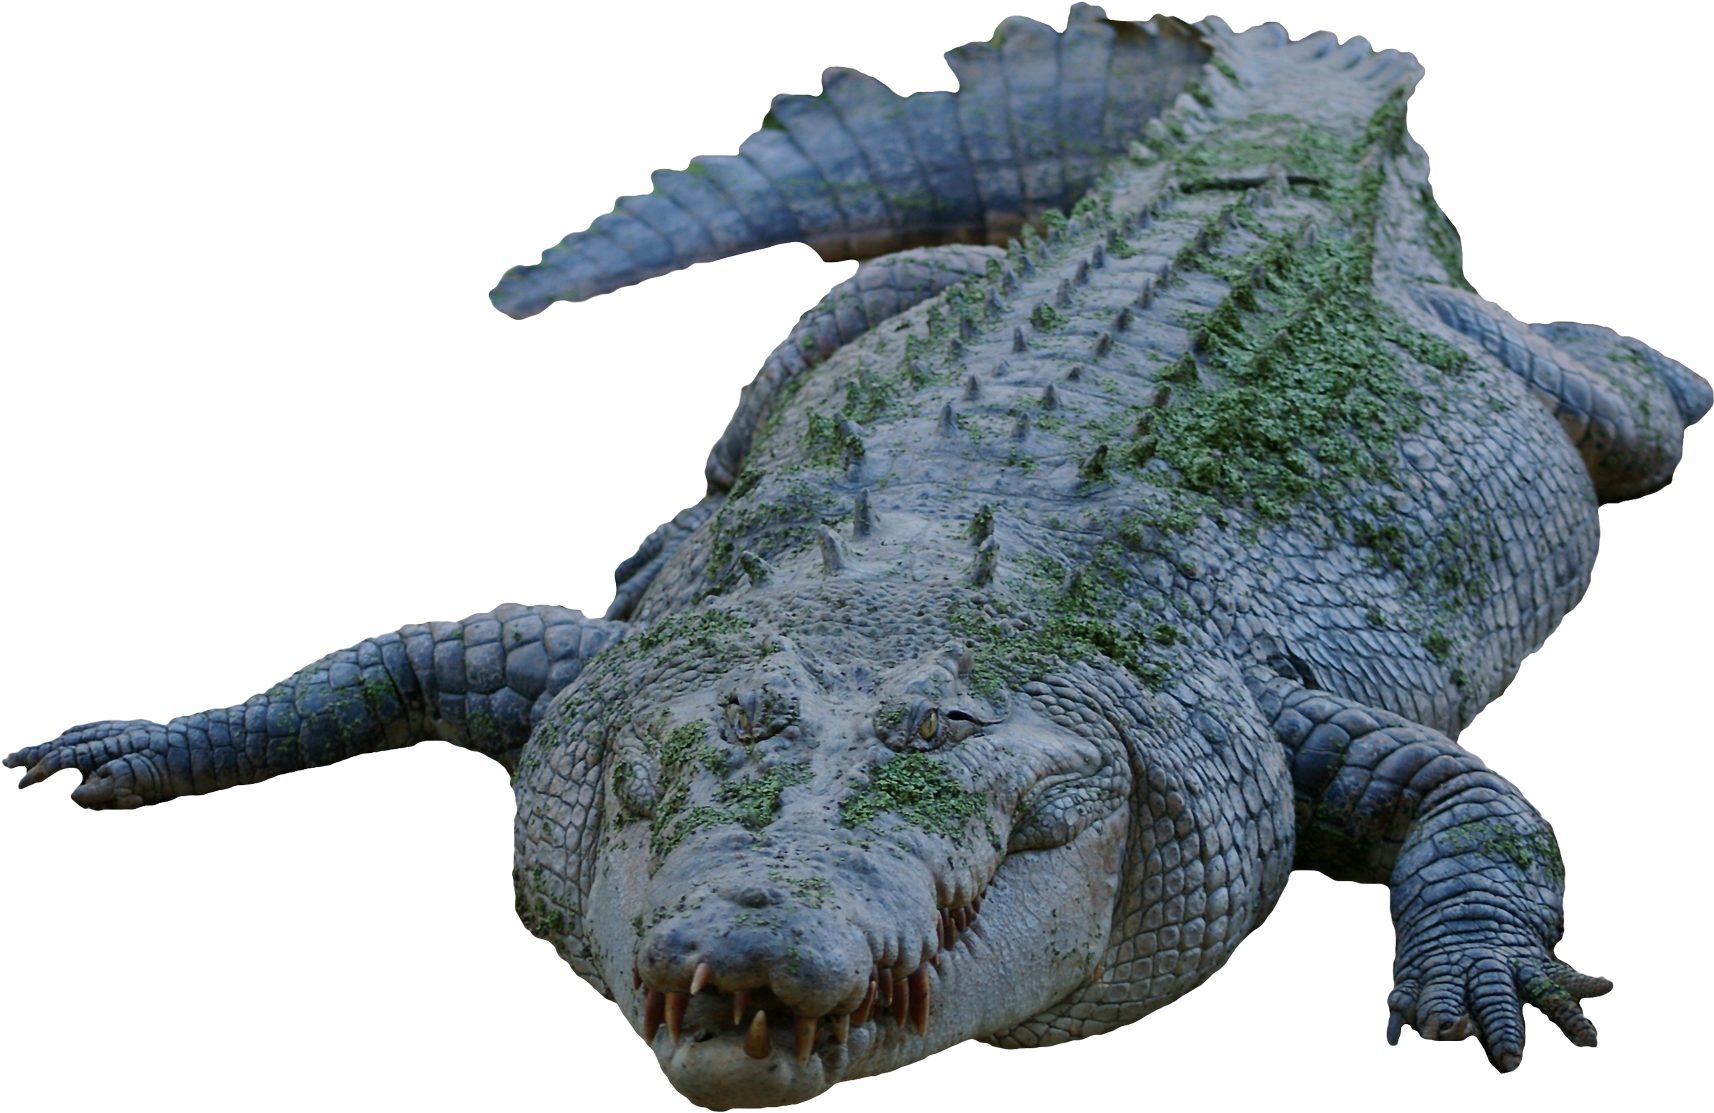 A Crocodile With Green Moss On Its Back